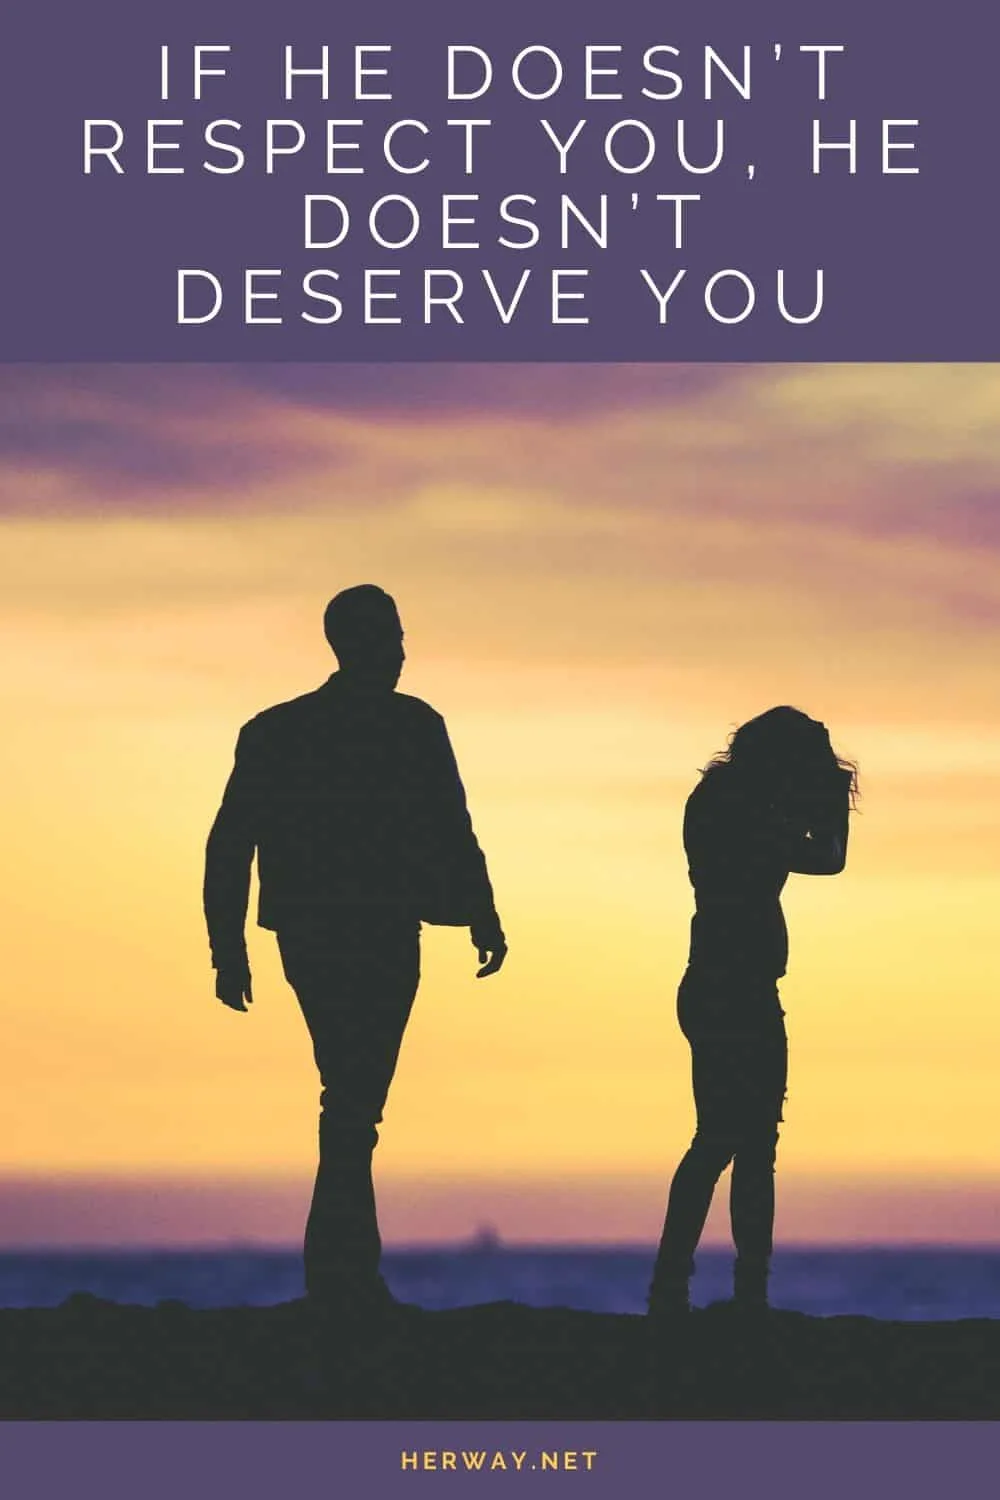 If He Doesn't Respect You, He Doesn't Deserve You